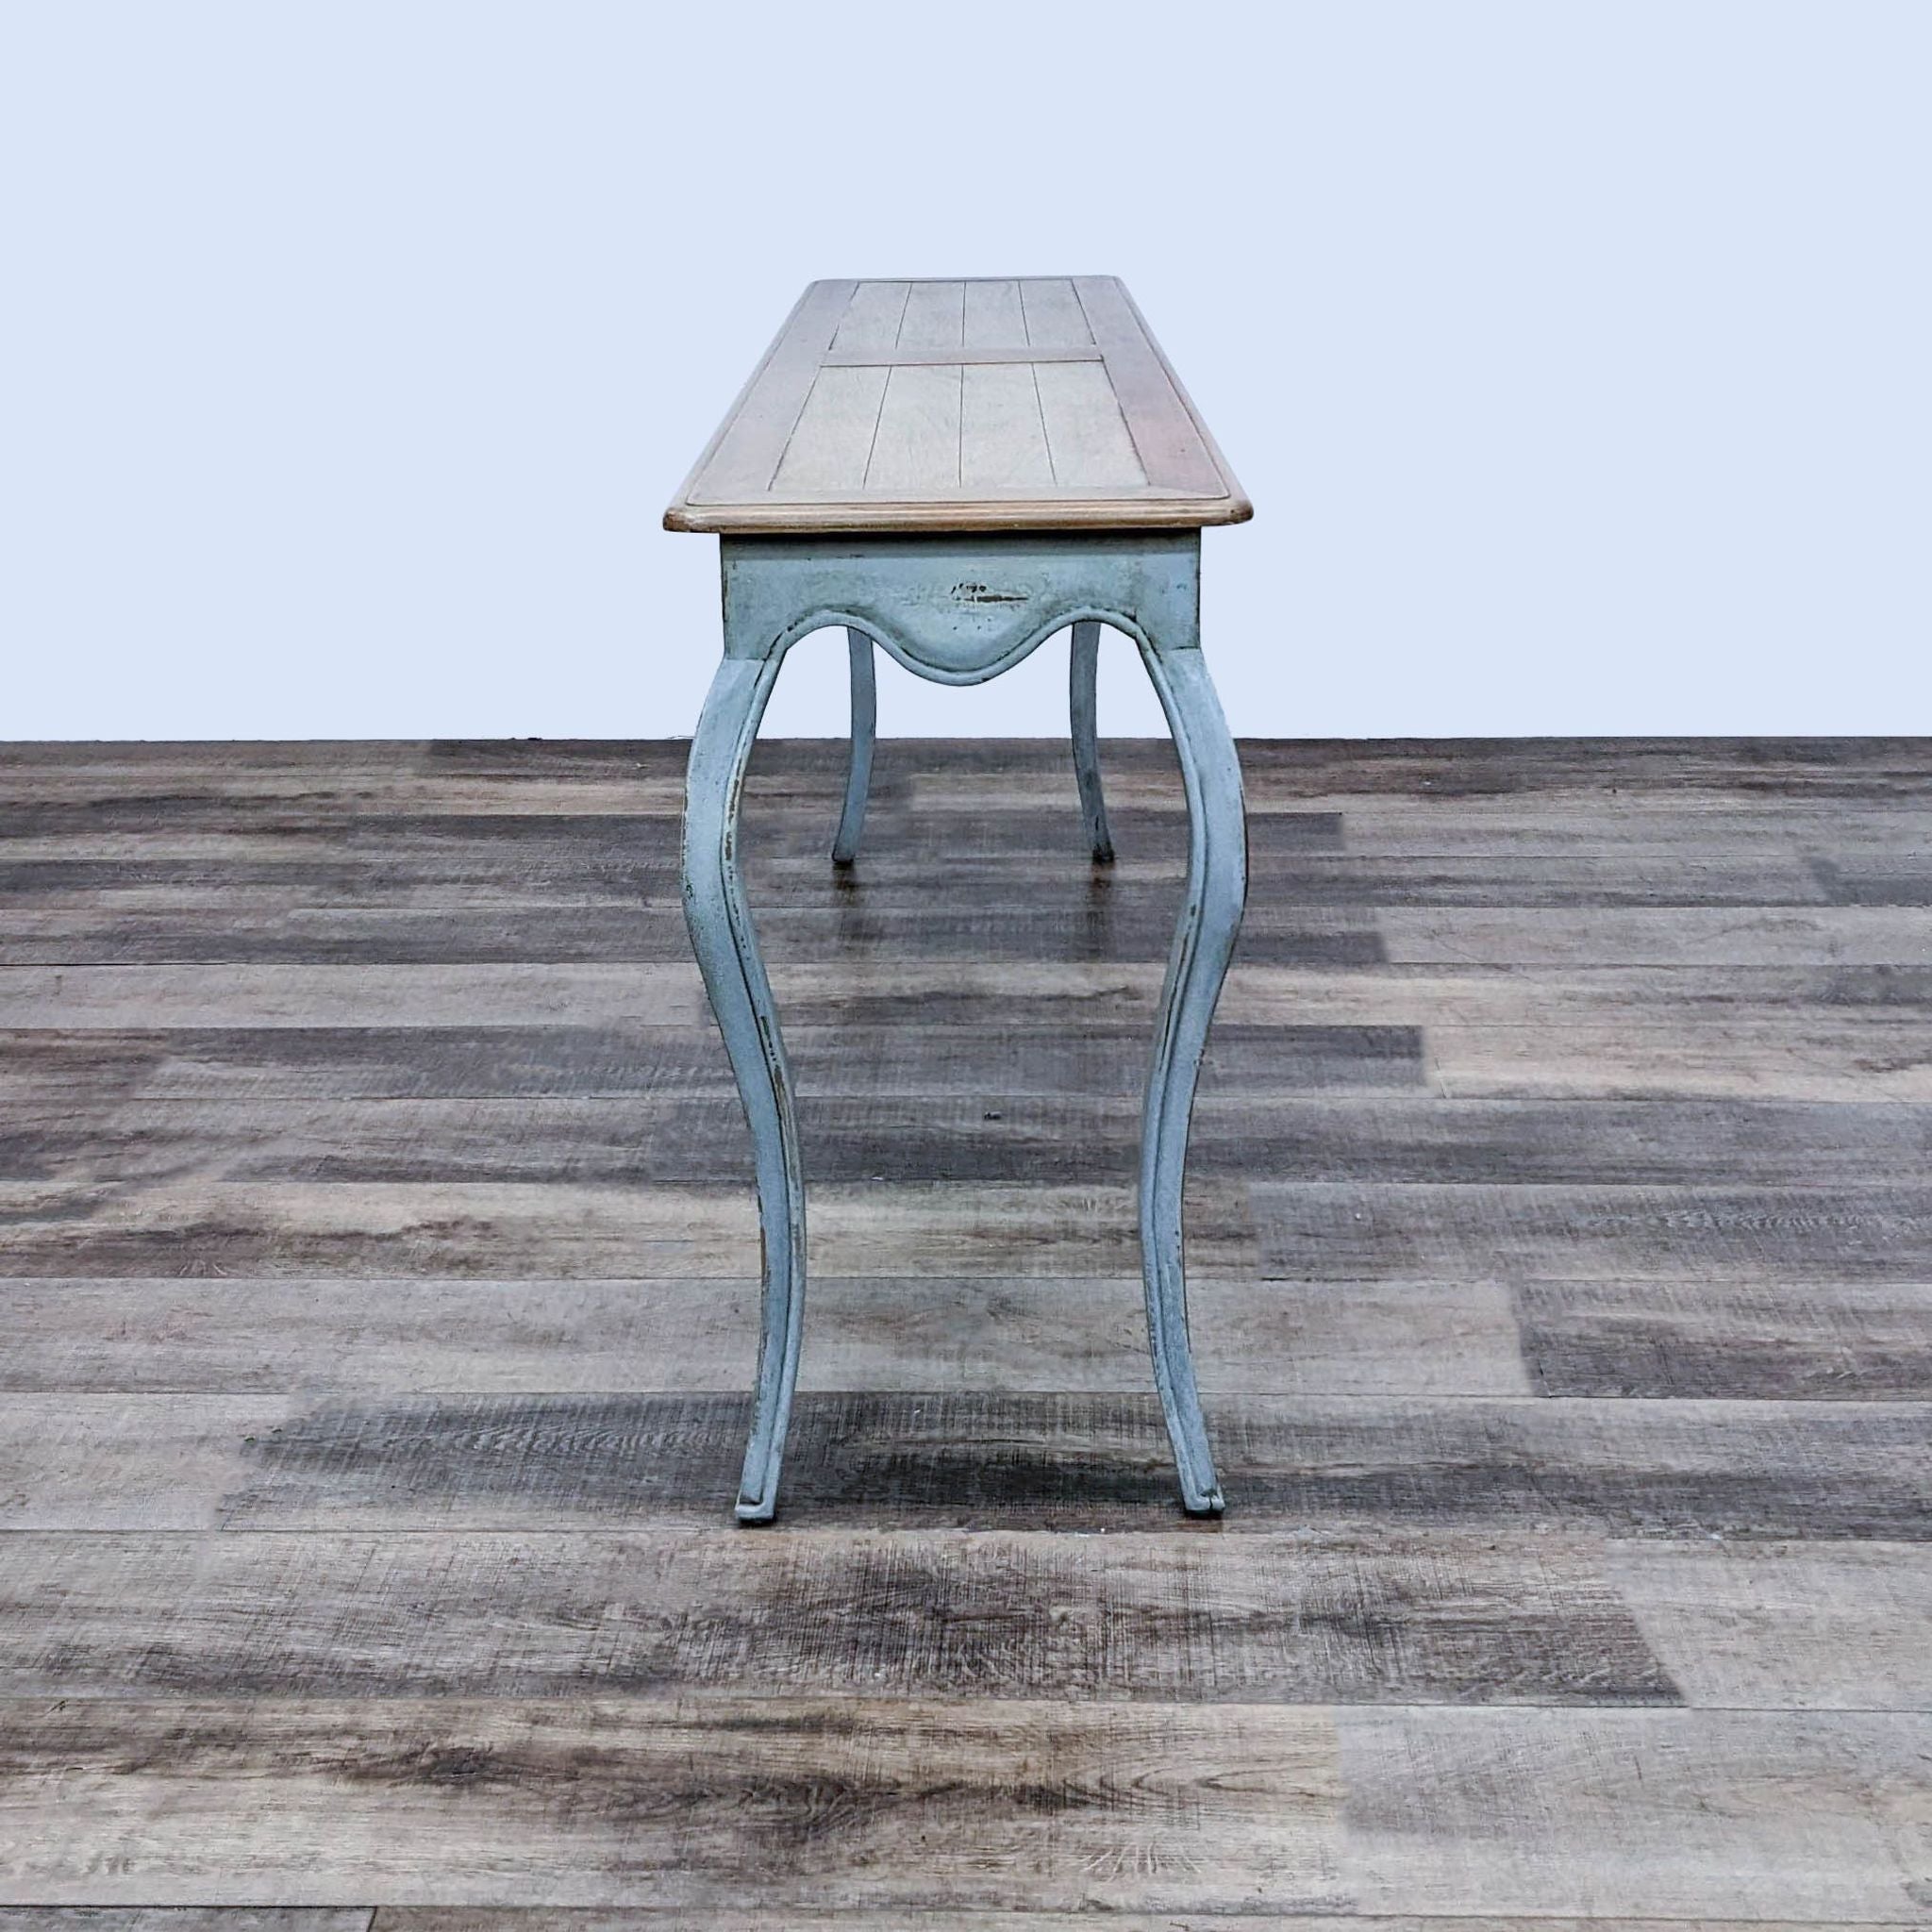 Contemporary French Provincial style side table by Port and Manor, with inlaid plank top and scalloped apron on cabriole legs.